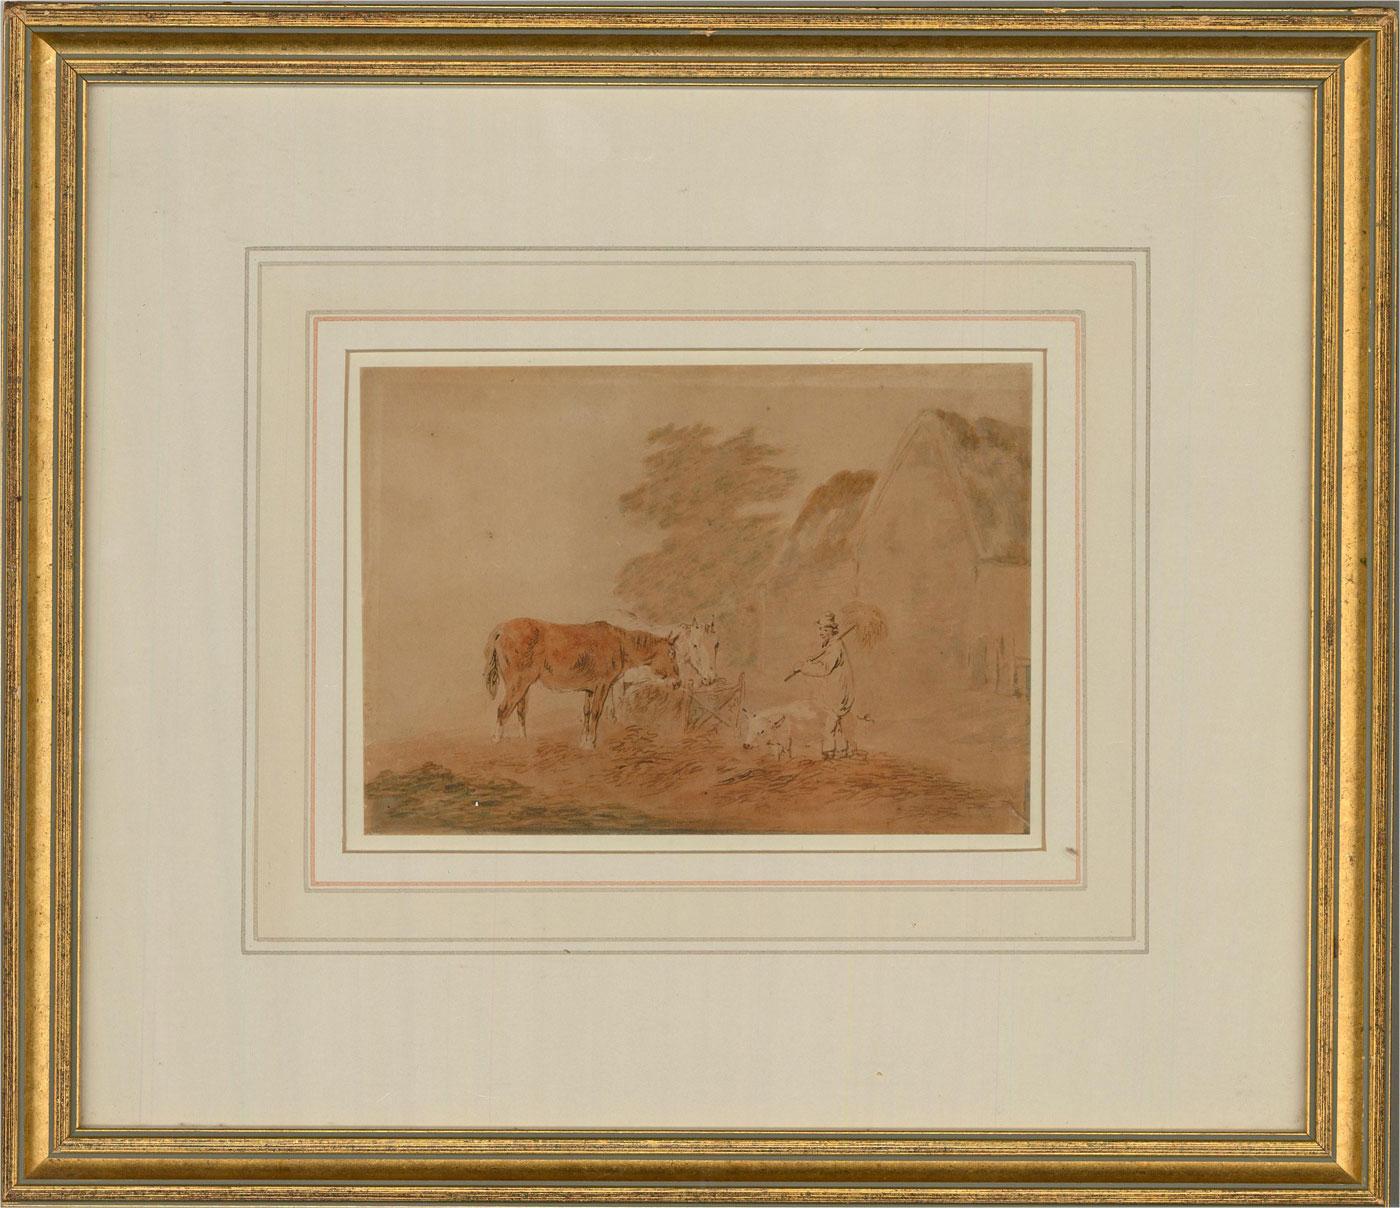 A farmyard scene with horses and cattle. Presented glazed in a washline mount and a distressed gilt-effect wooden frame. Though unsigned, the painting is typical of the artist and was paired with a signed work by La Cave when acquired by Sulis Fine